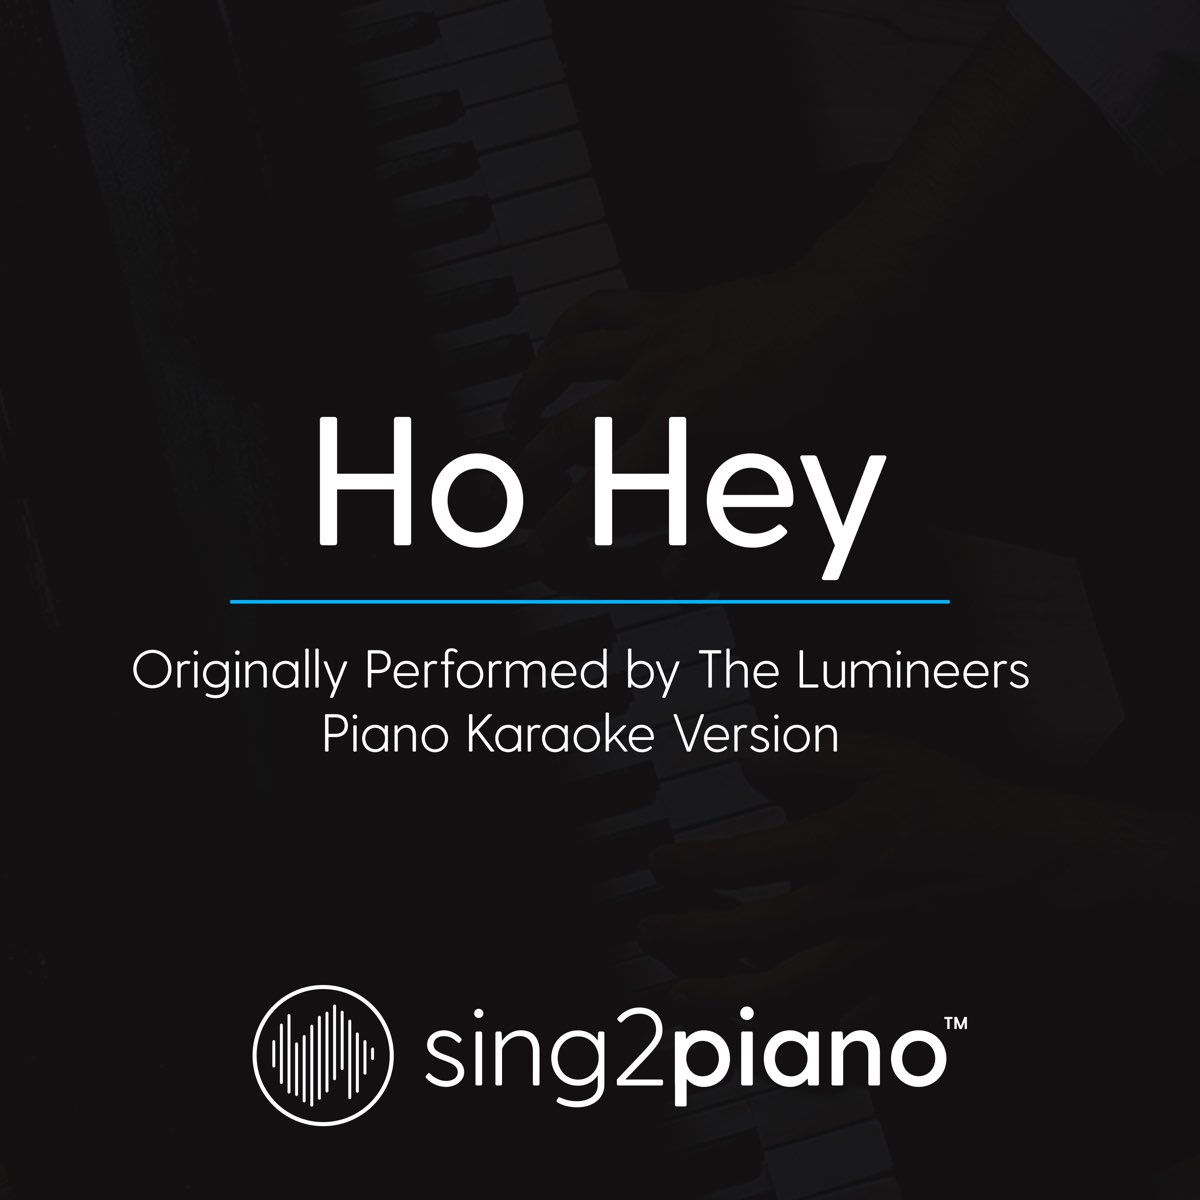 Ho Hey (Originally Performed by the Lumineers) [Piano Karaoke Version] -  Single by Sing2Piano on Apple Music